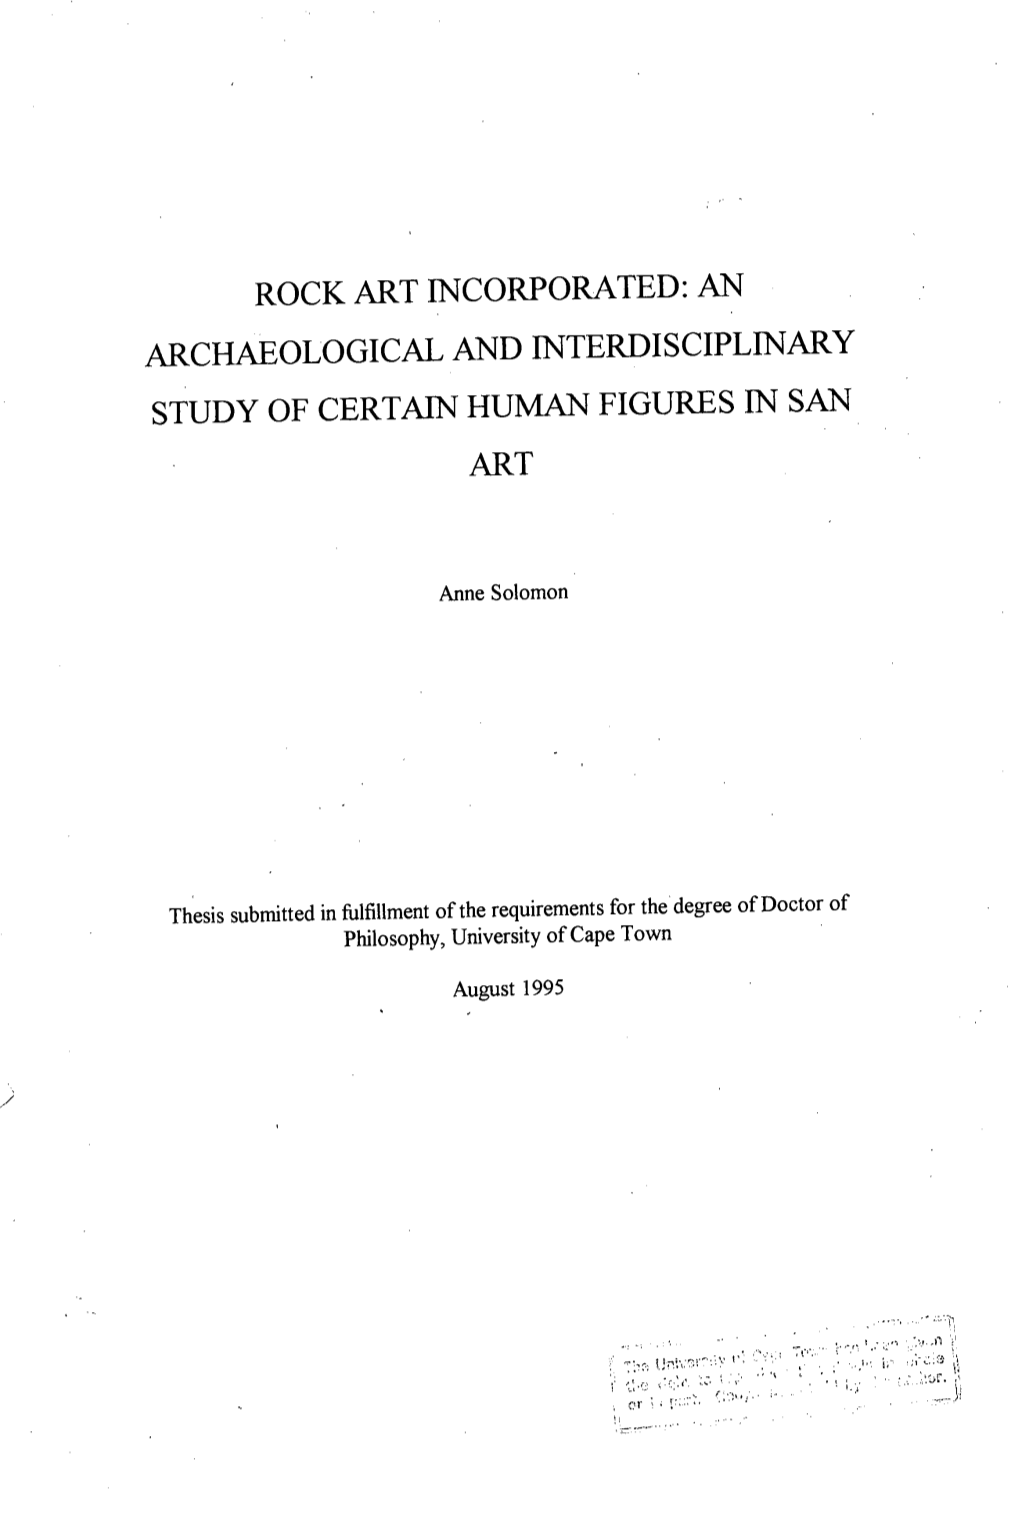 Rock Art Incorporated: an Archaeological and Interdisciplinary Study of Certain Human Figures in San Art